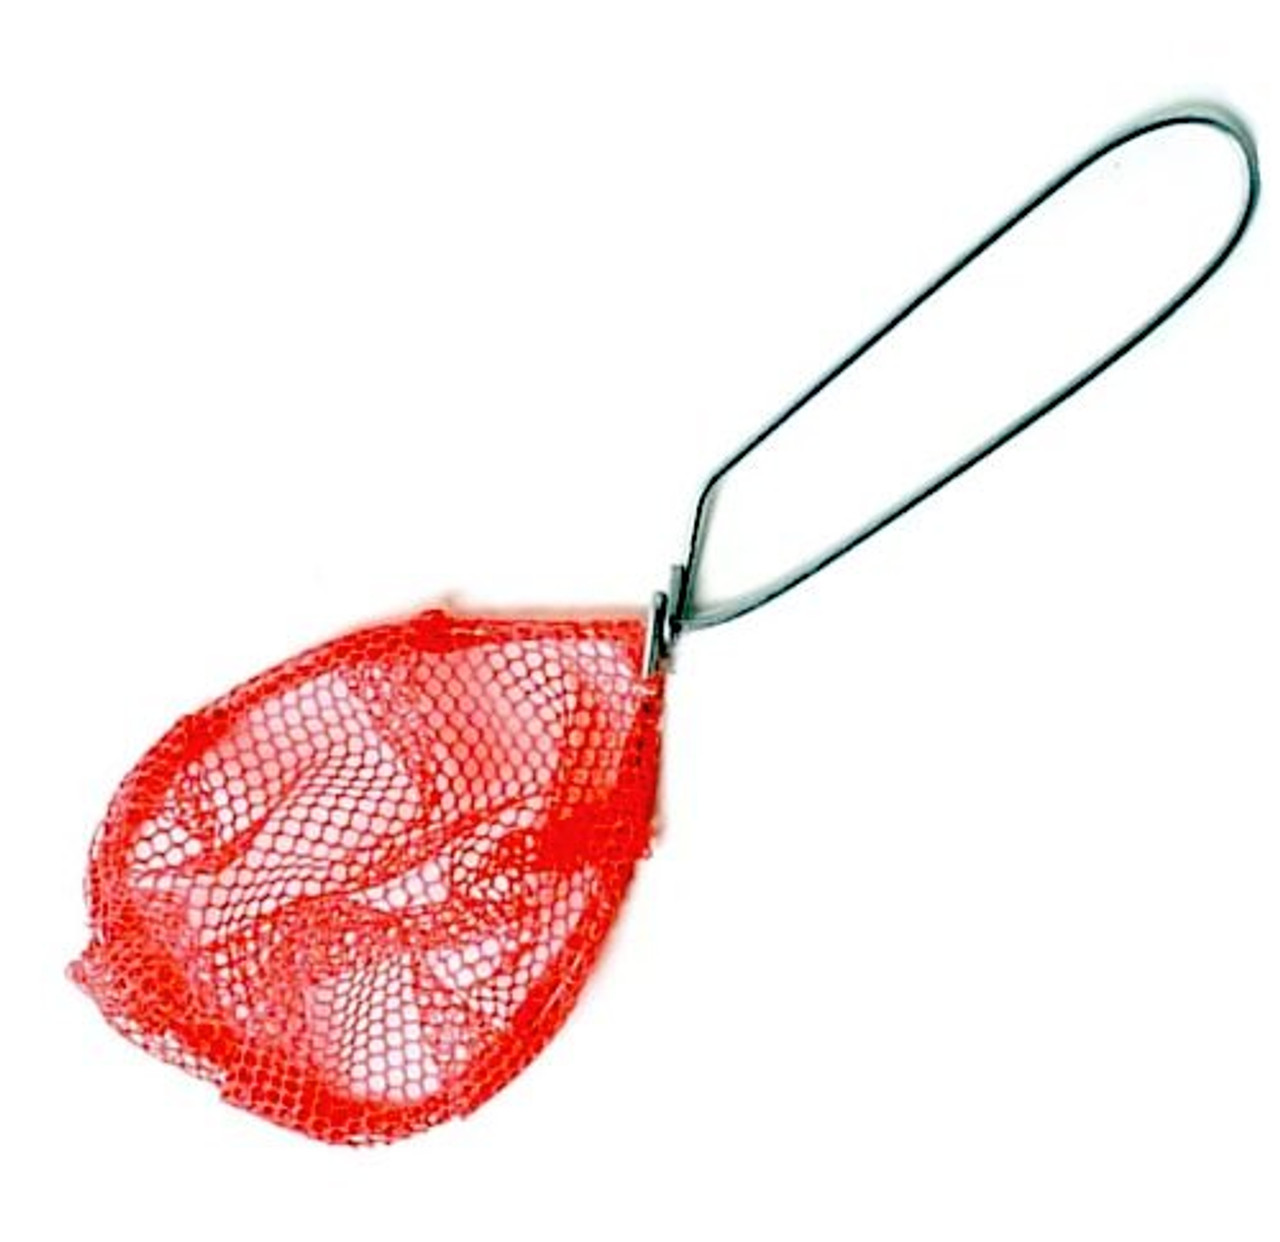 SMALL MINNOW FISH/DIP NET WITH HANDLE PKG(2)